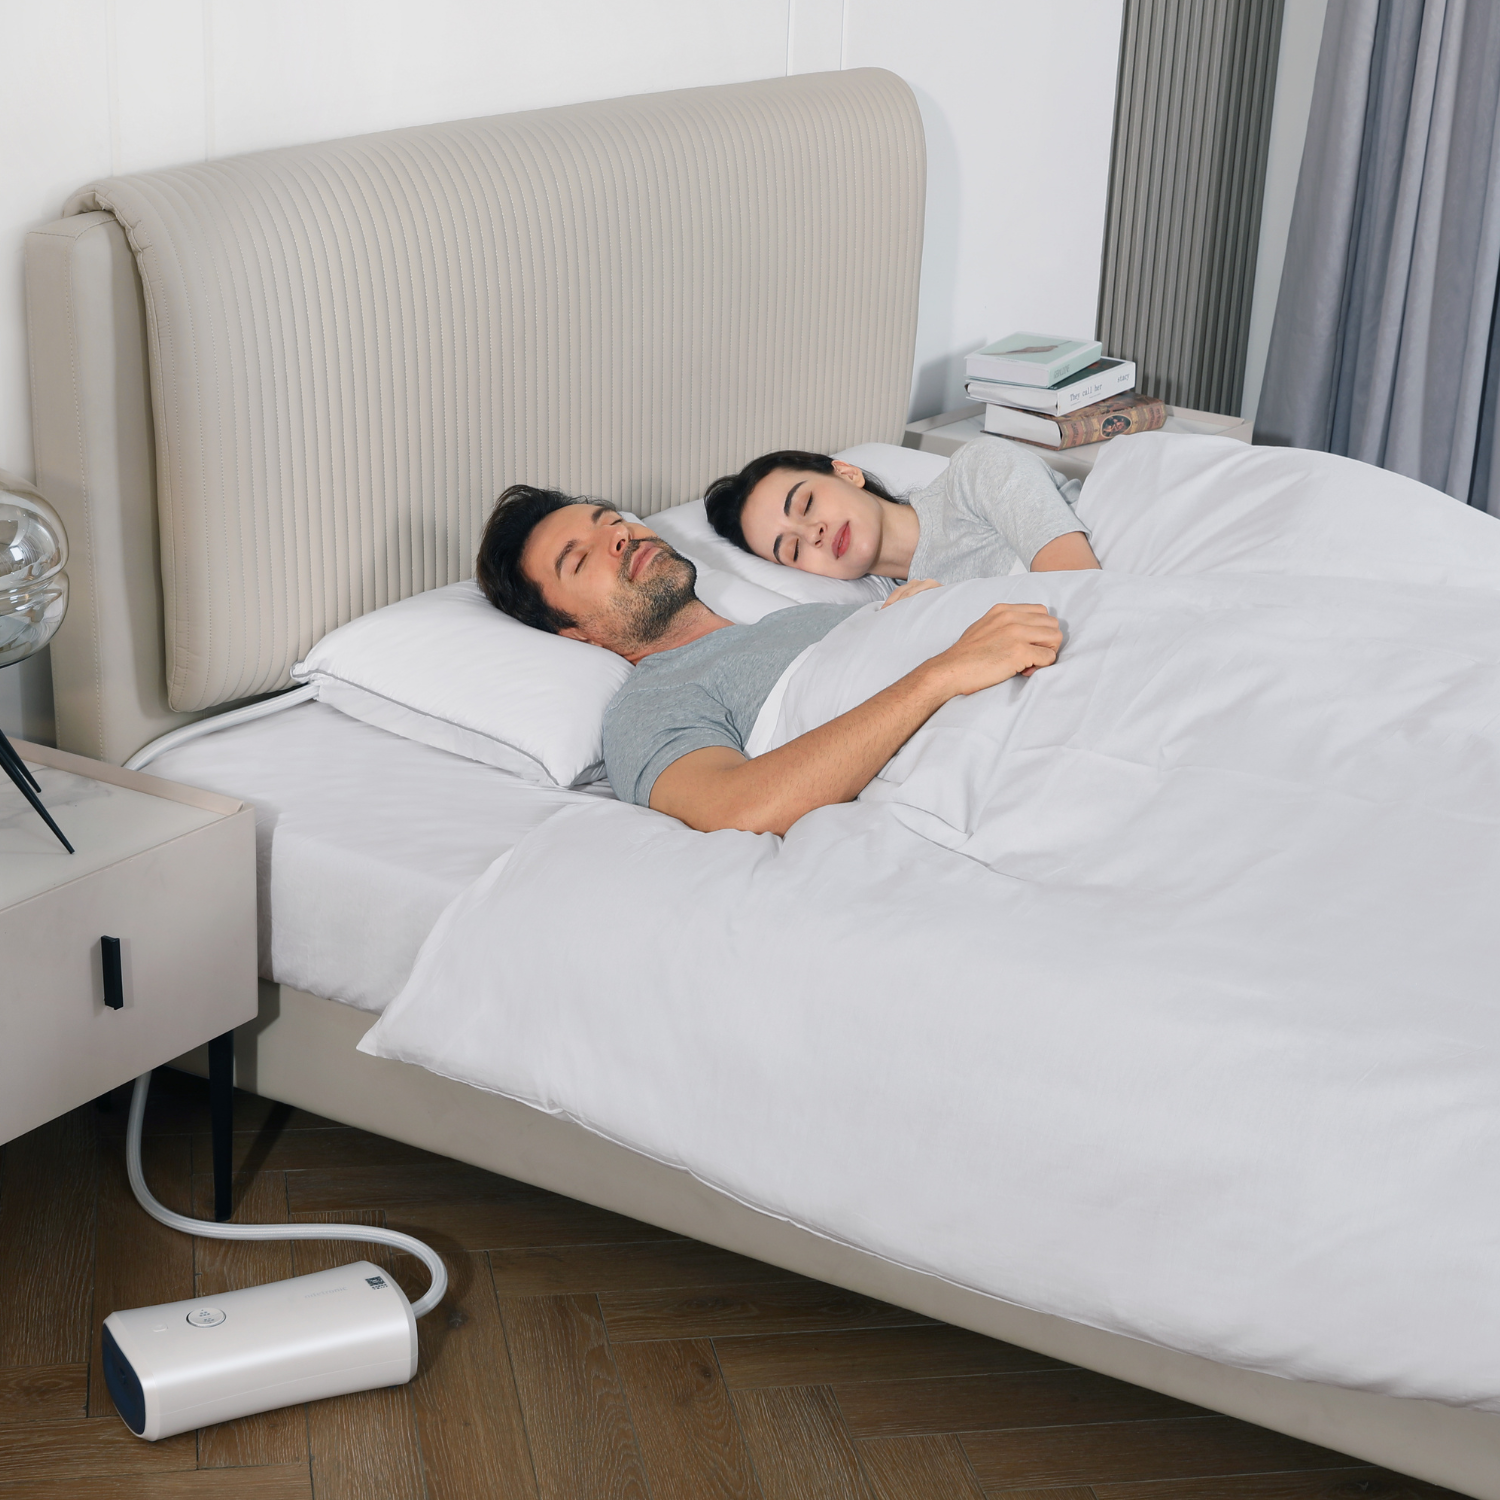 Snoring Isn't Your Fault, But Not Using Nitetronic Z6 Is